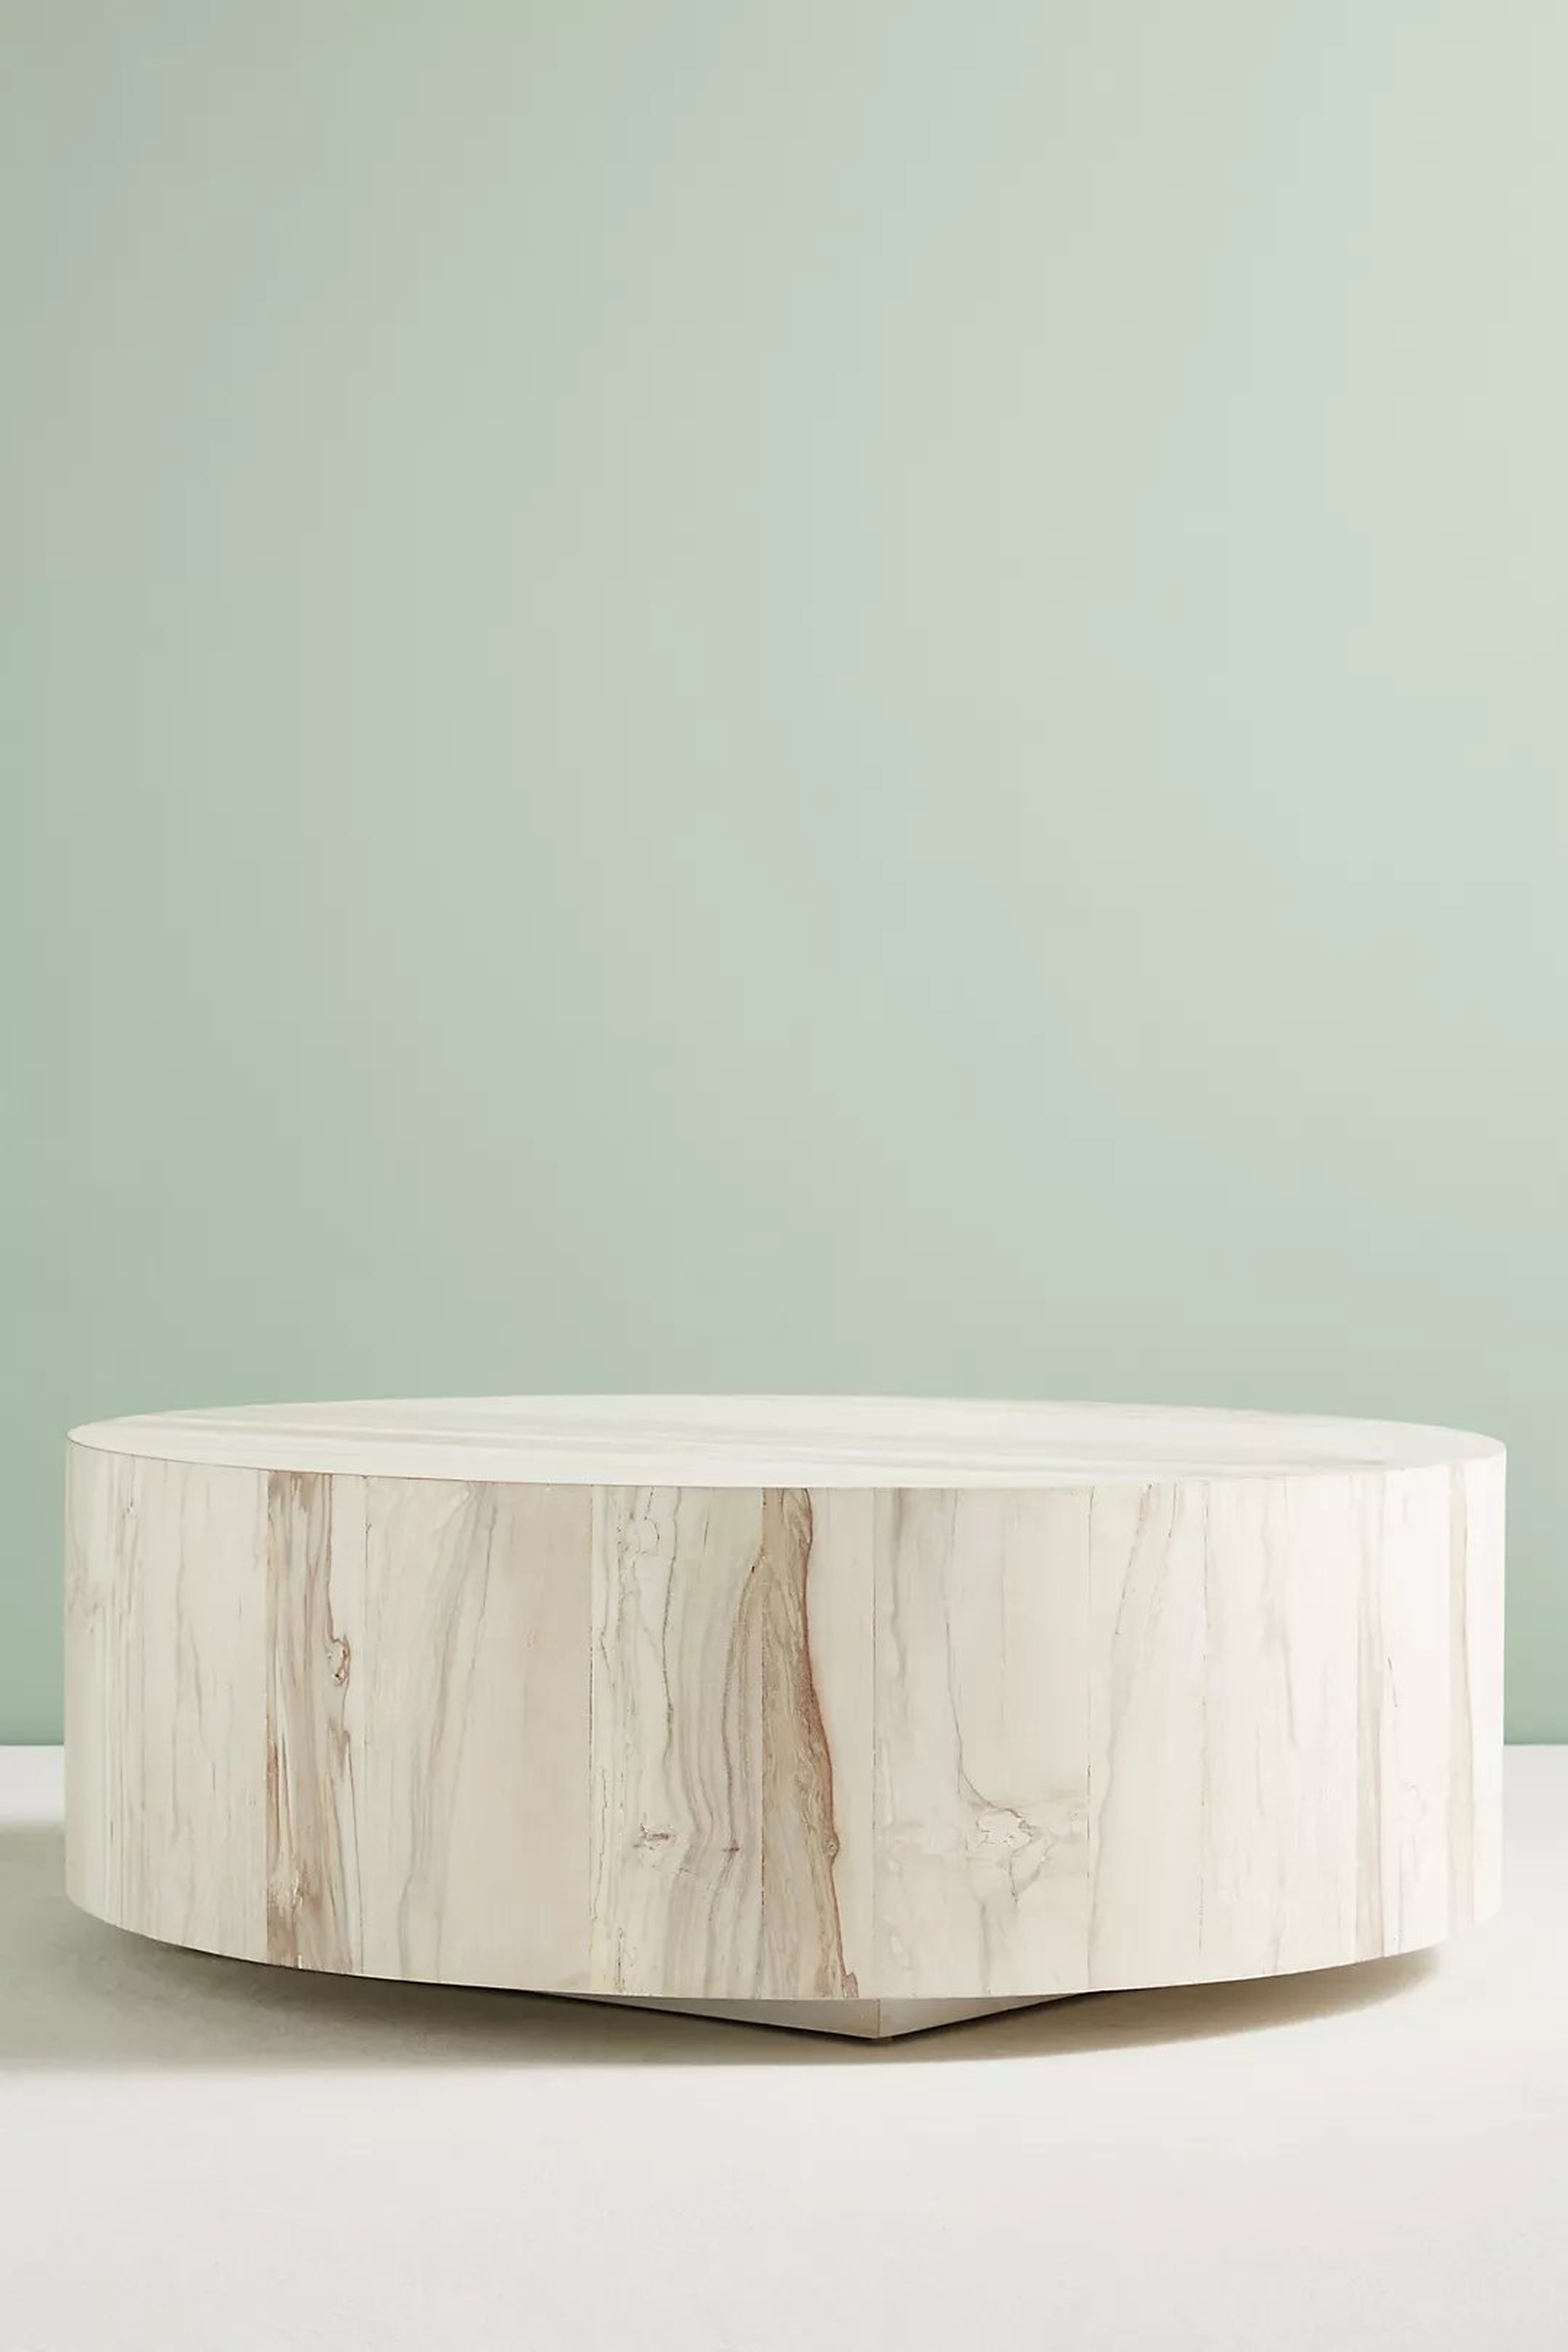 Swirled Drum Coffee Table - Large - Anthropologie